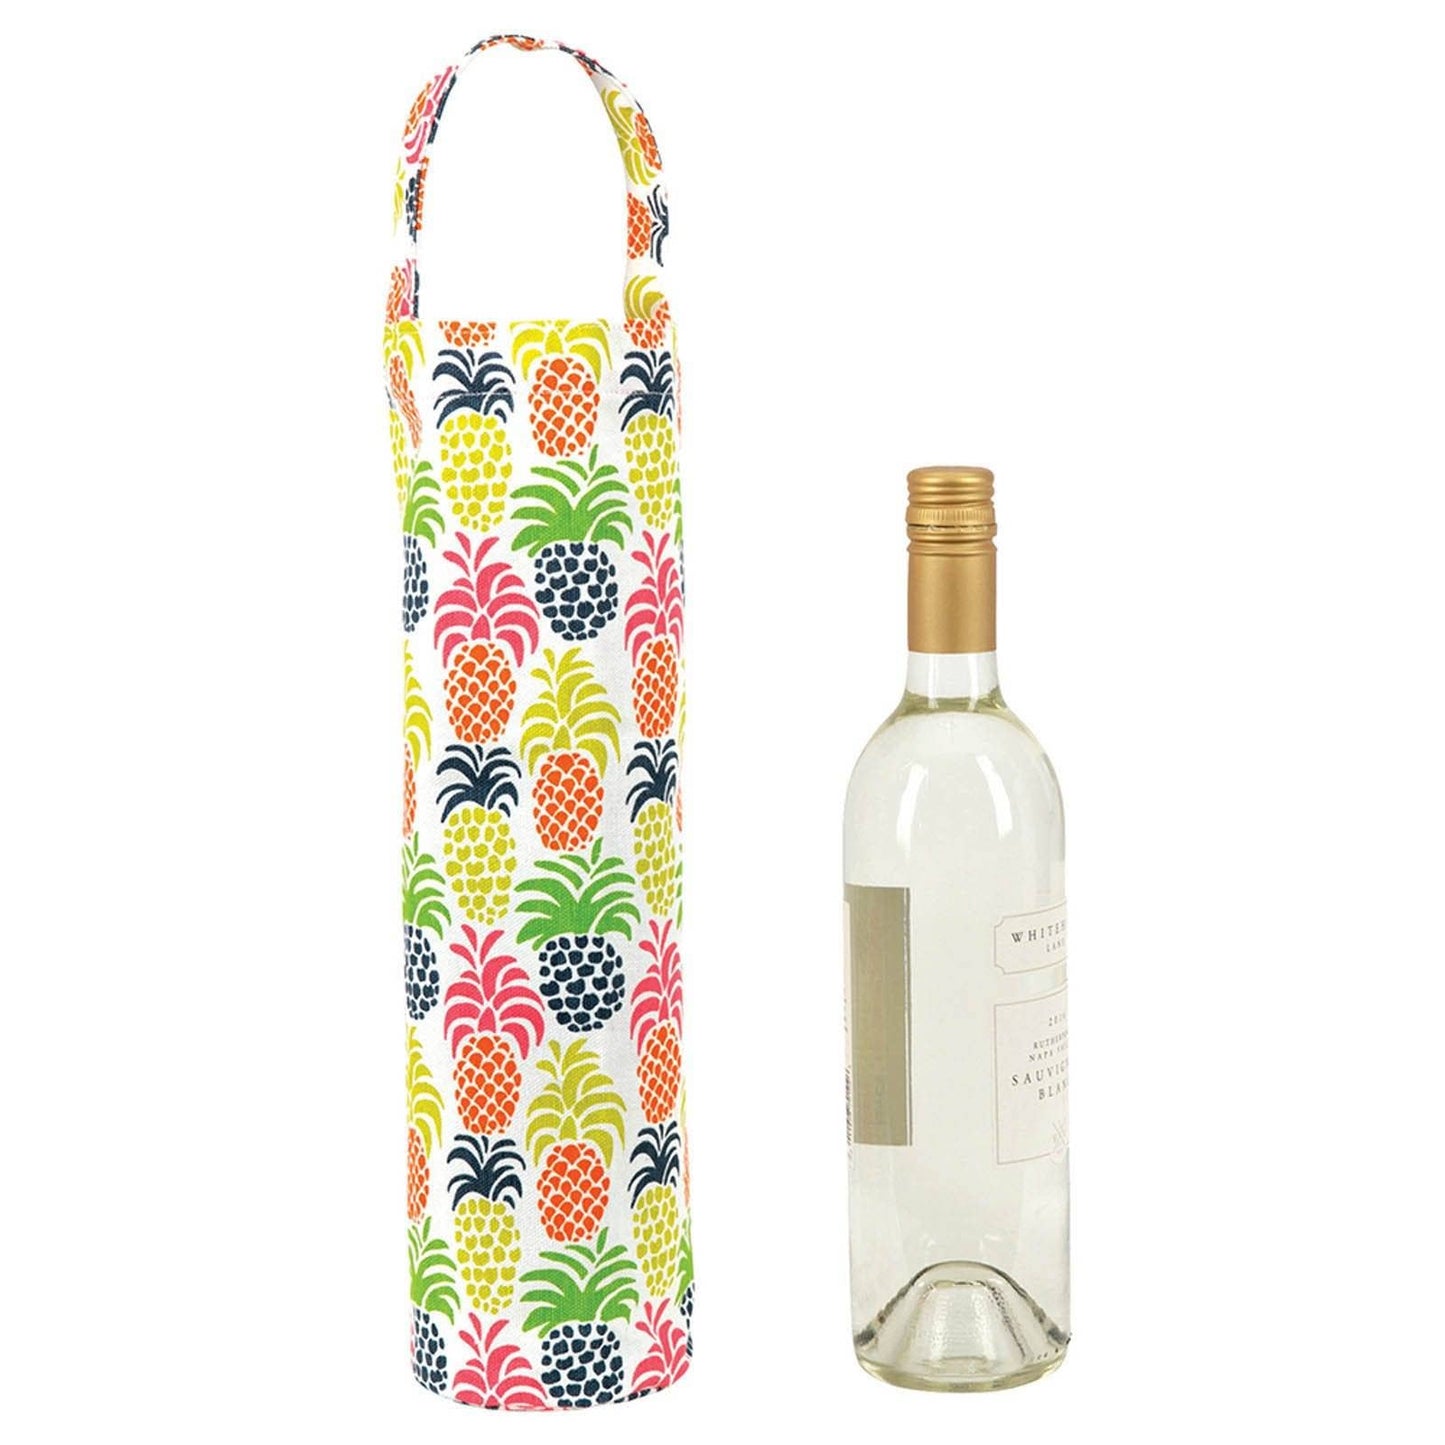 Pineapple Party Wine Tote